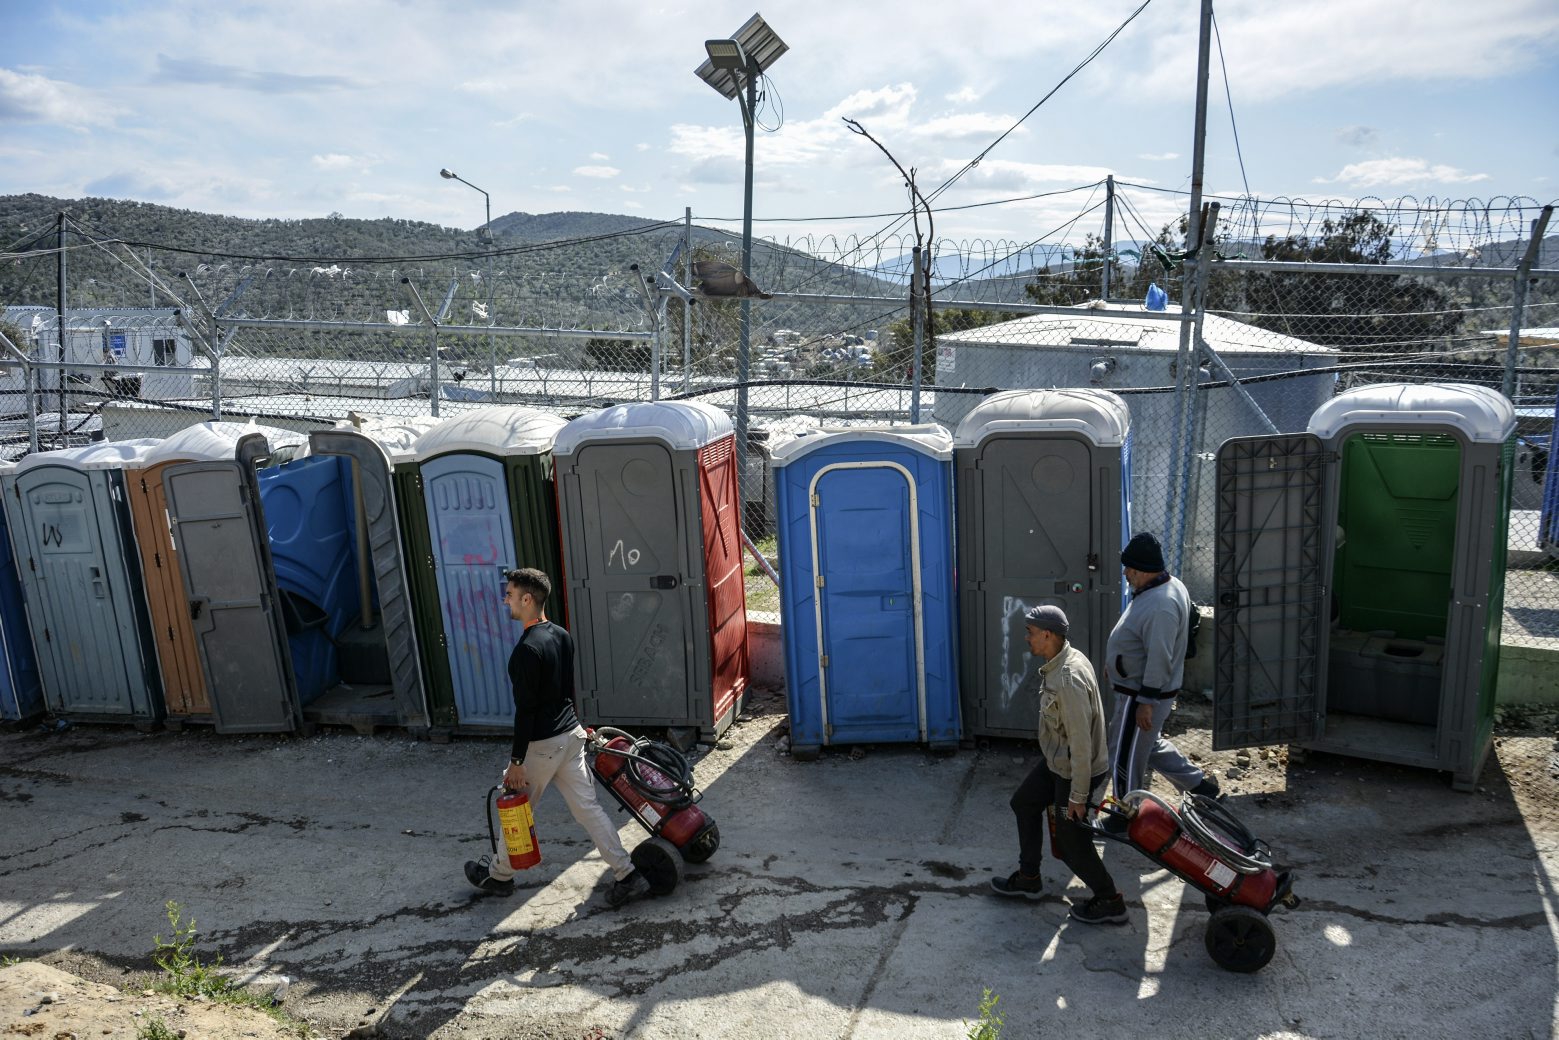 Migrants pull fire extinguishers in Moria refugee camp on the northeastern Aegean island of Lesbos, Greece, Monday, March 16, 2020. The Fire Service said a migrant, who was not further identified, was found dead inside Moria camp after the fire broke out Monday. (AP Photo/Panagiotis Balaskas) Greece Migrants